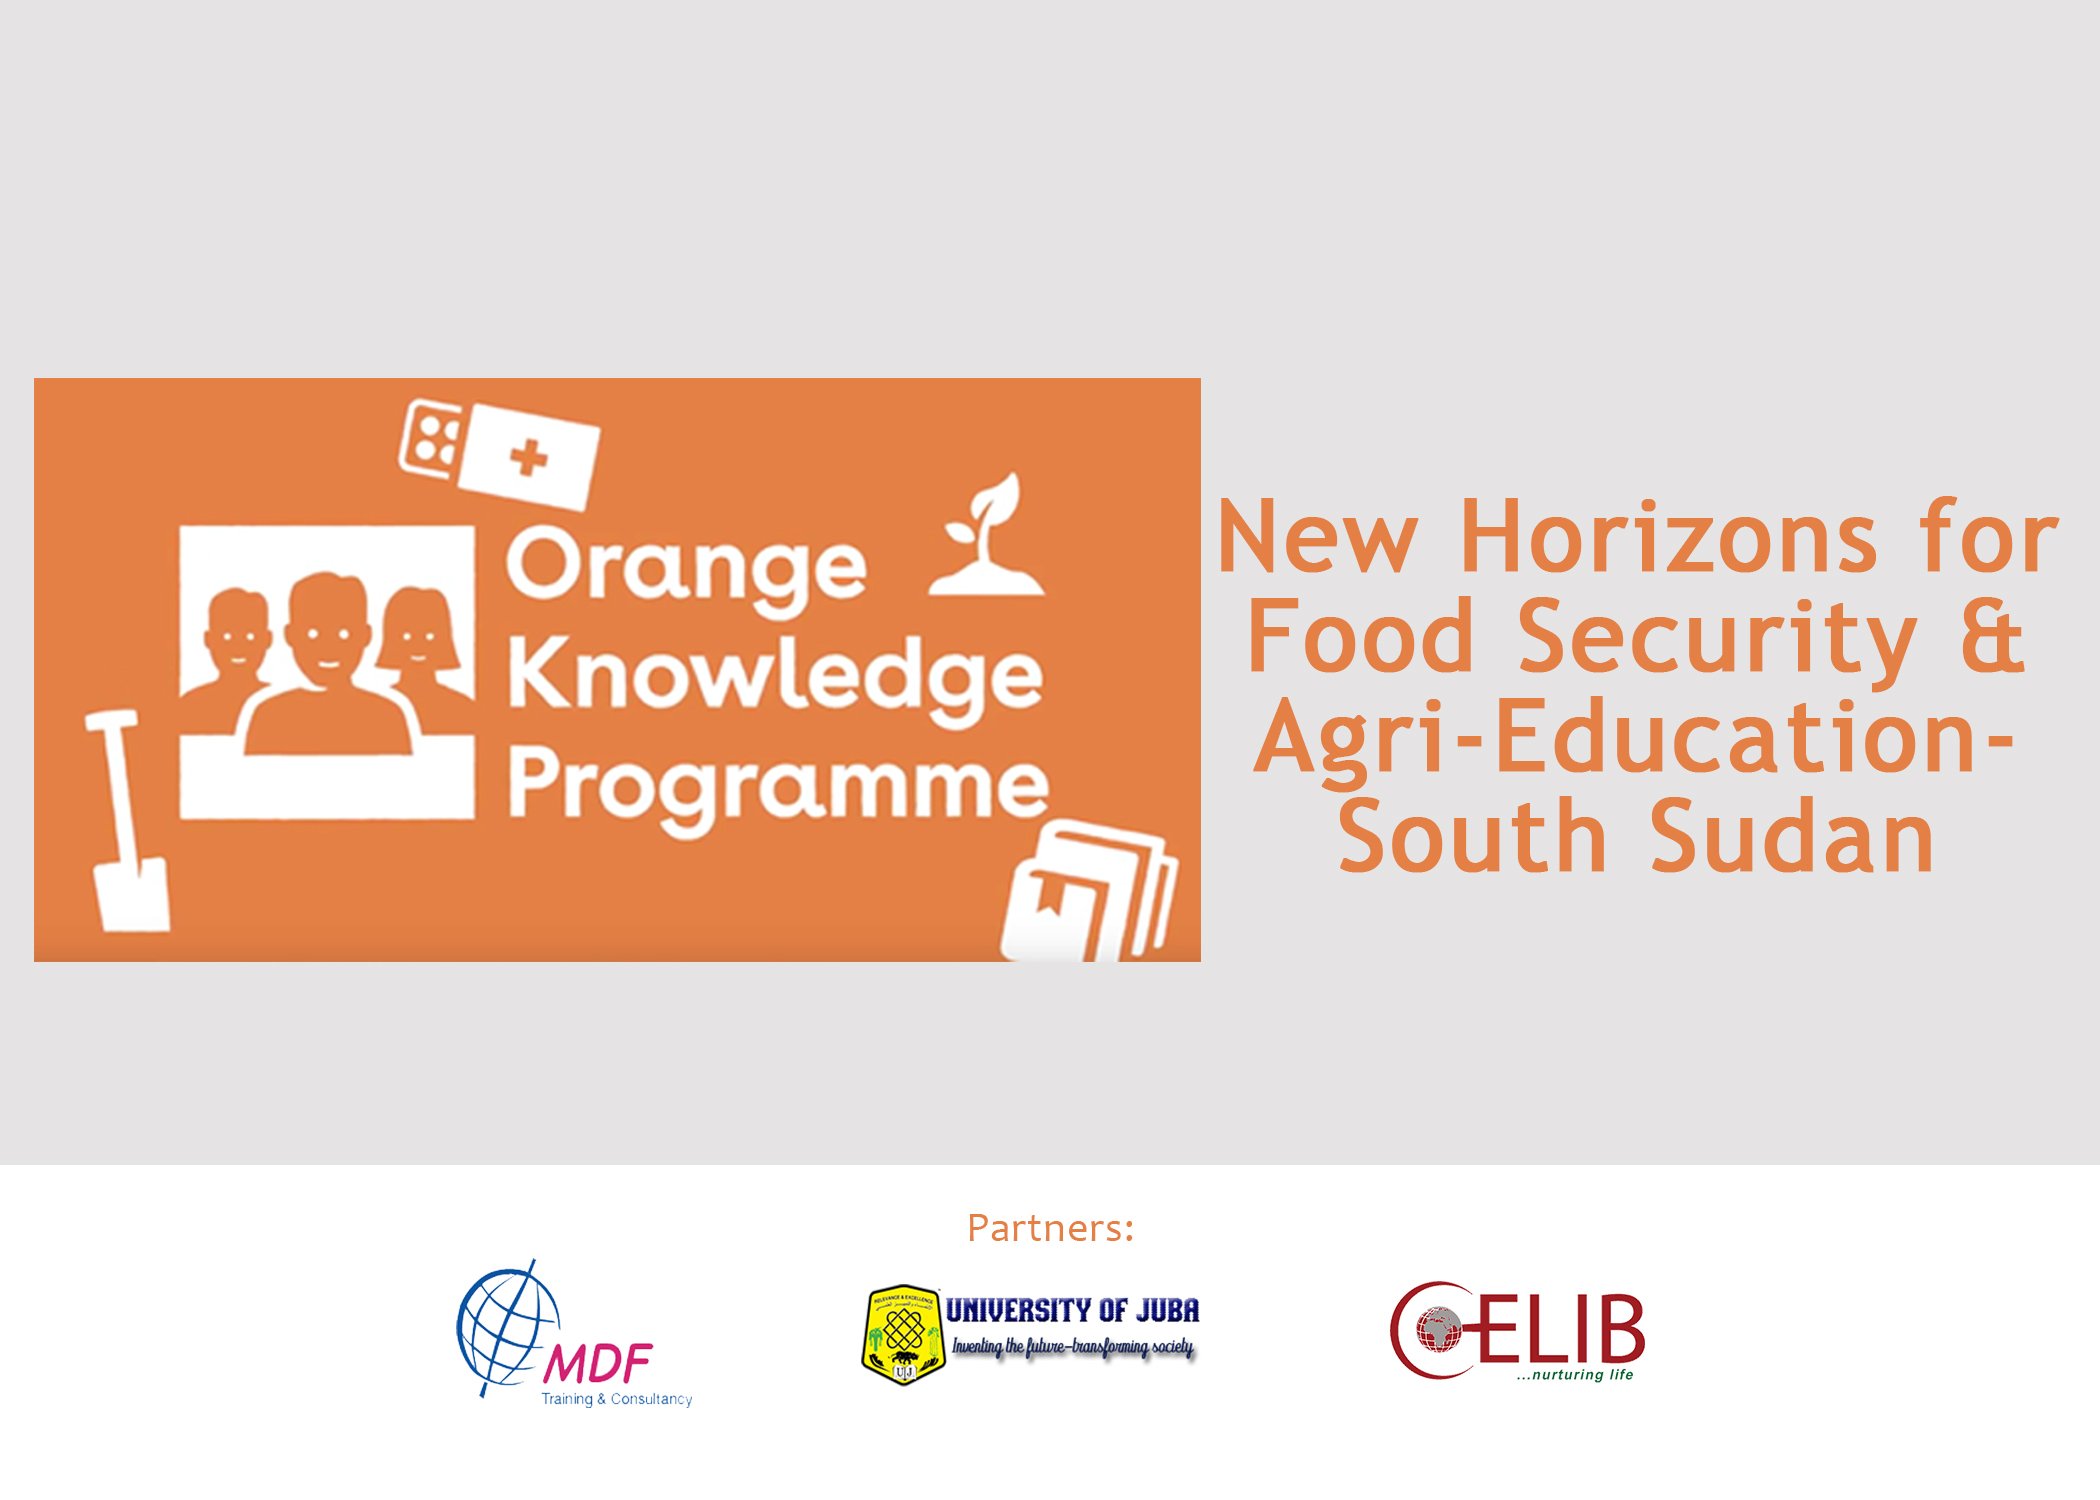 CoELIB Centre and MDF Training and Consultancy take lead in a new project ‘New horizon for Food Security and Agri-education in Southern Sudan’ funded within the Orange Knowledge Programme (OKP)